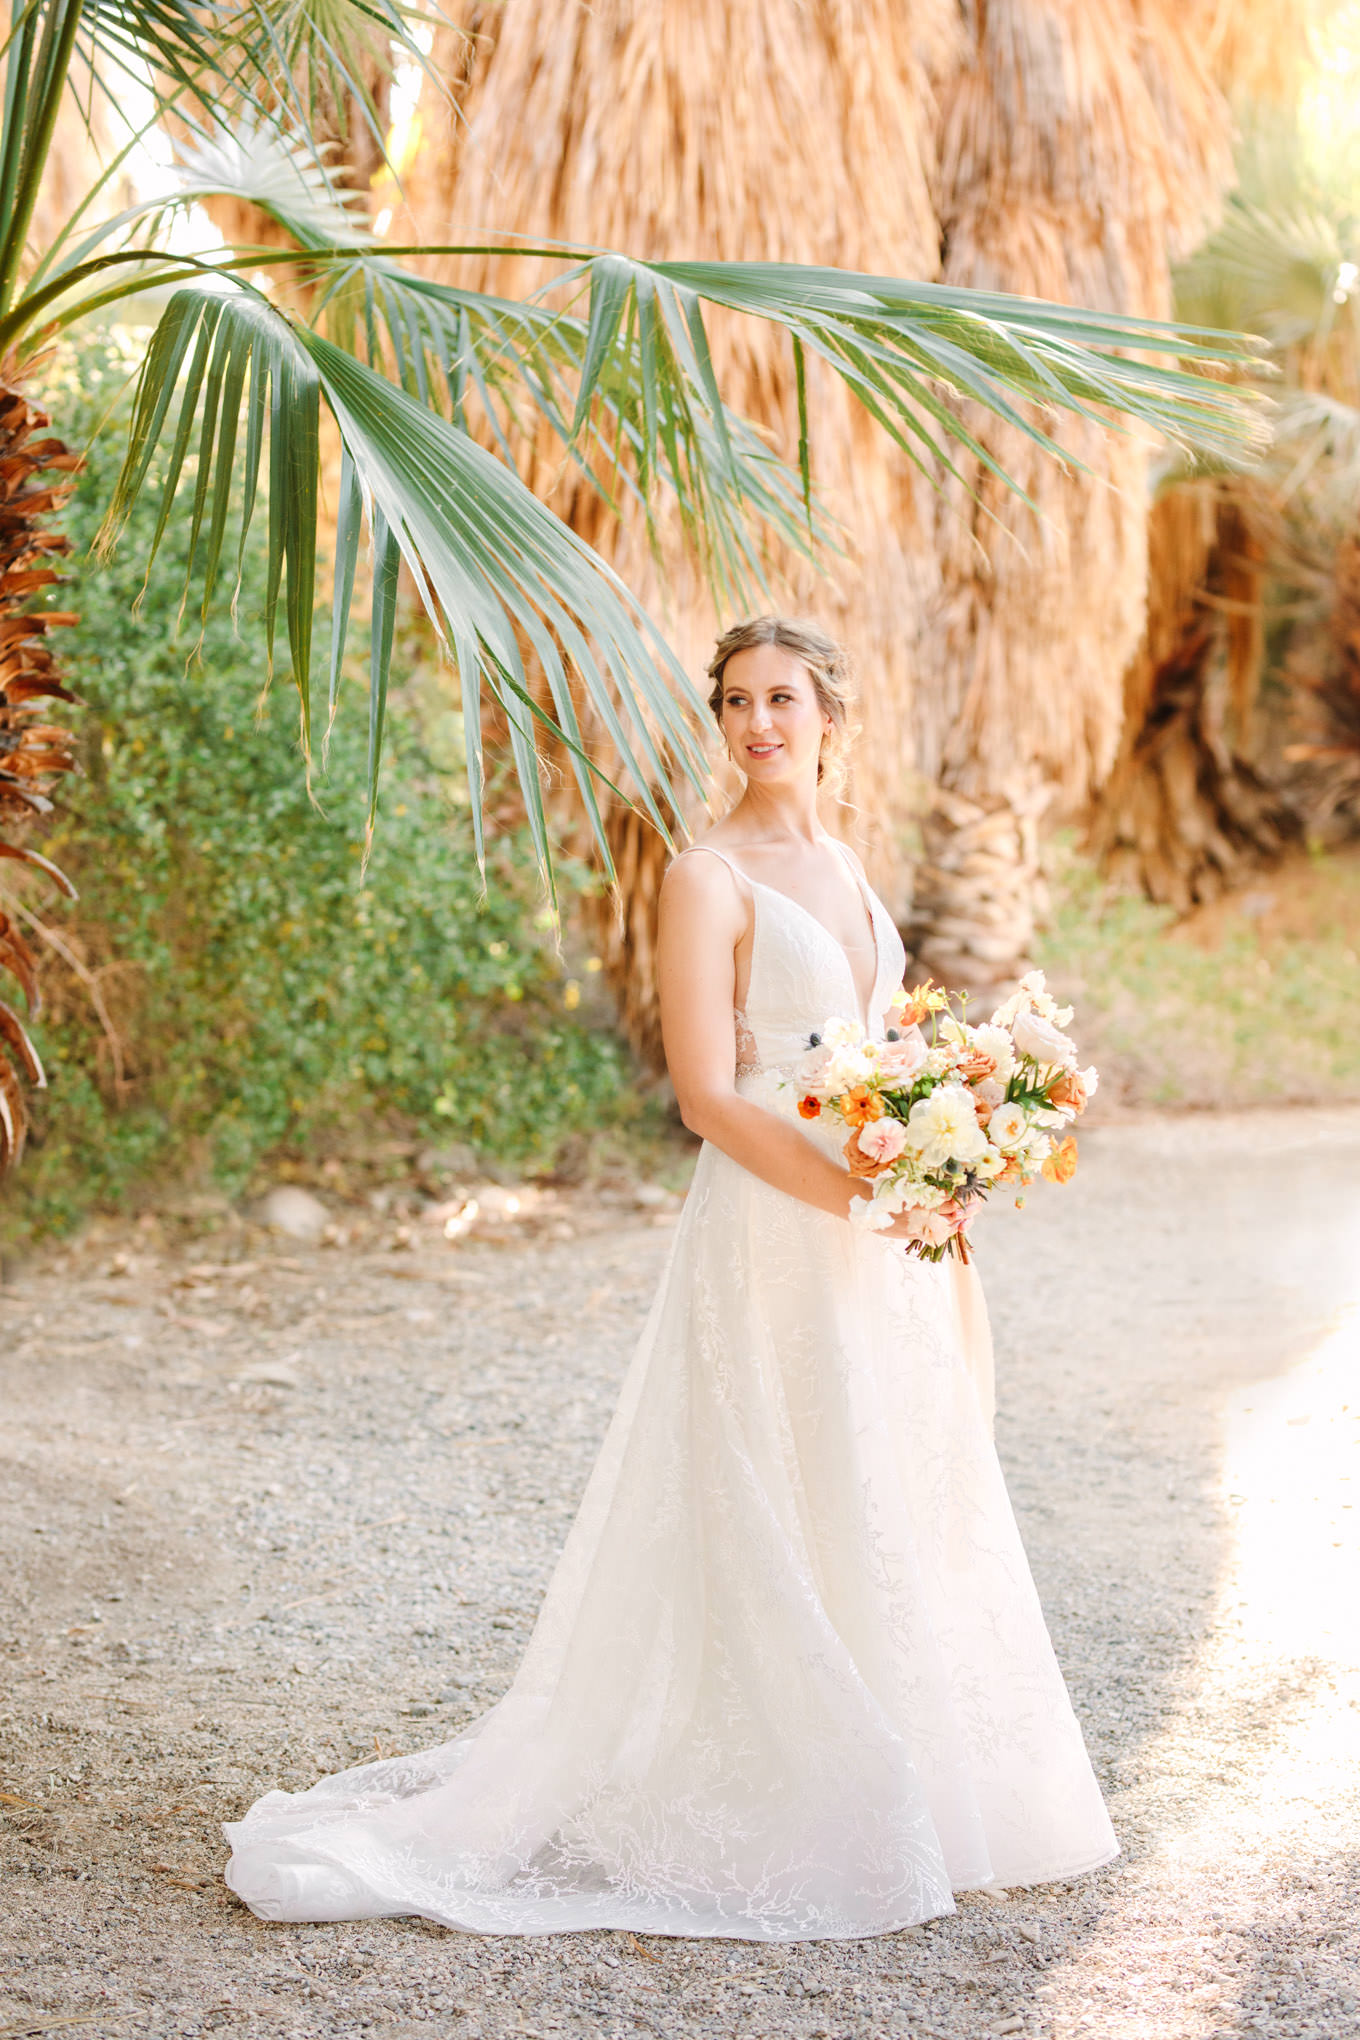 Bride in palm garden | Living Desert Zoo & Gardens wedding with unique details | Elevated and colorful wedding photography for fun-loving couples in Southern California |  #PalmSprings #palmspringsphotographer #gardenwedding #palmspringswedding  Source: Mary Costa Photography | Los Angeles wedding photographer 